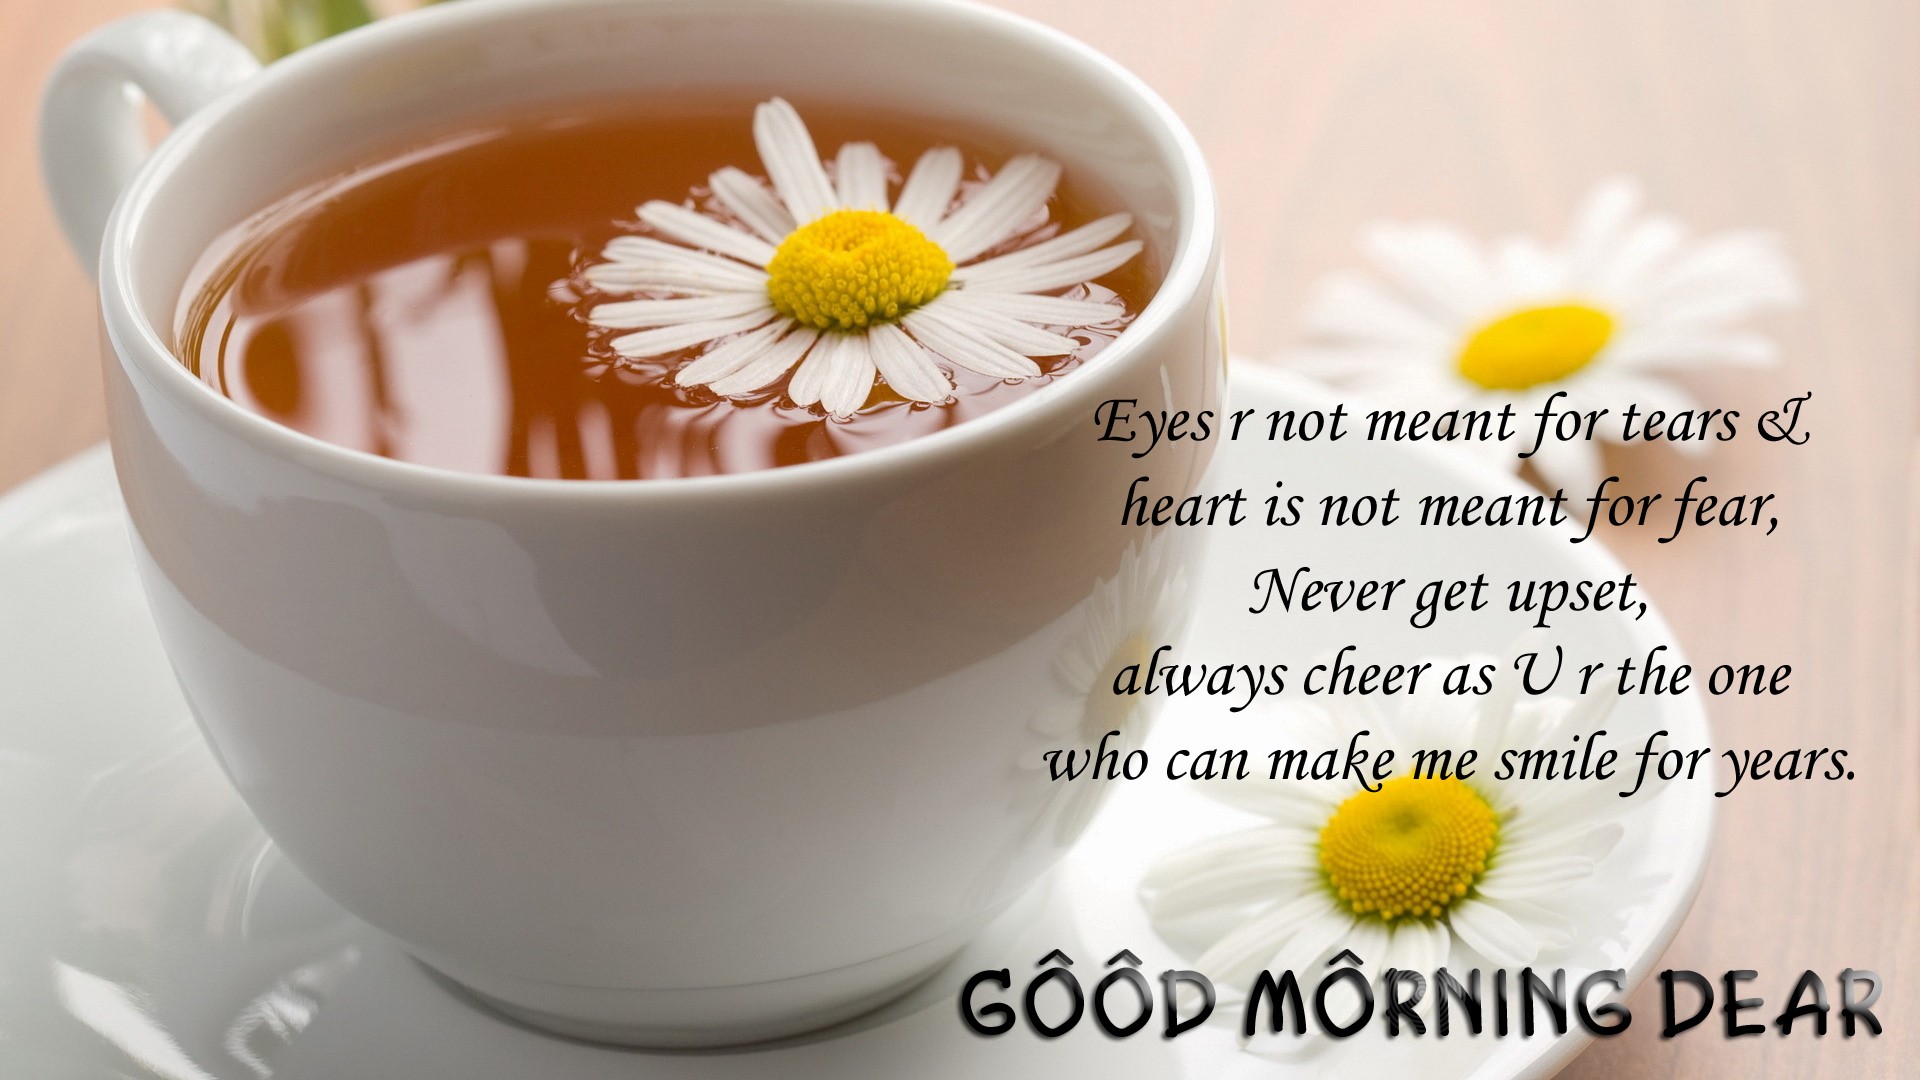 Good Morning Dear Wish Quotes Wallpapers HD Wallpapers